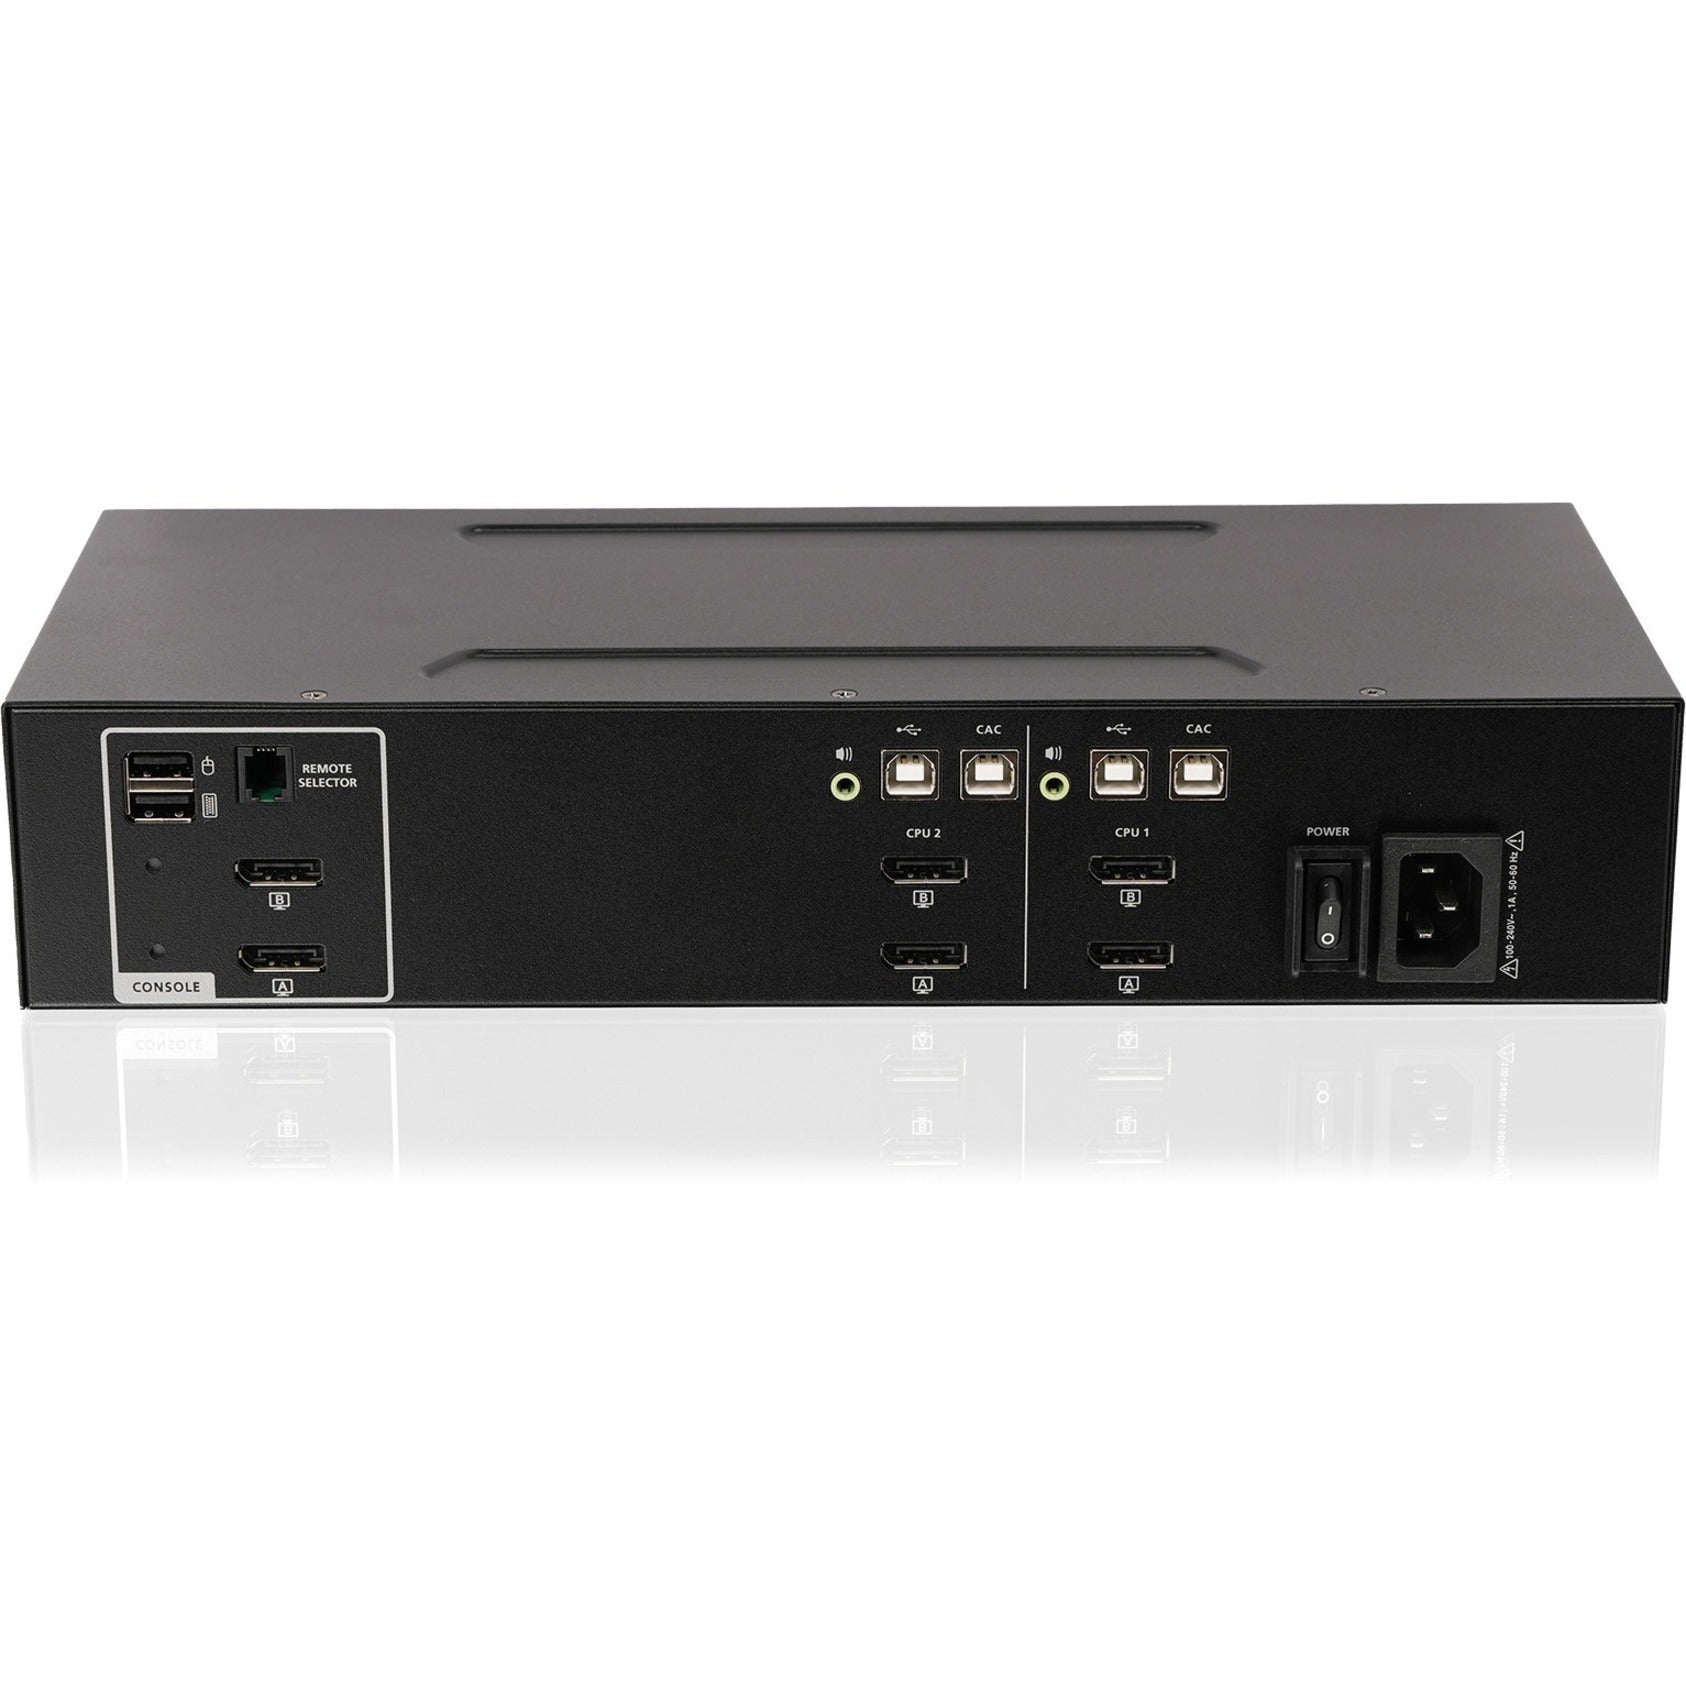 IOGEAR GCS1422TAA4C 2-Port Dual View DisplayPort Secure KVM Switch w/Audio and CAC Support, 3840 x 2160 Resolution, 3 Year Warranty